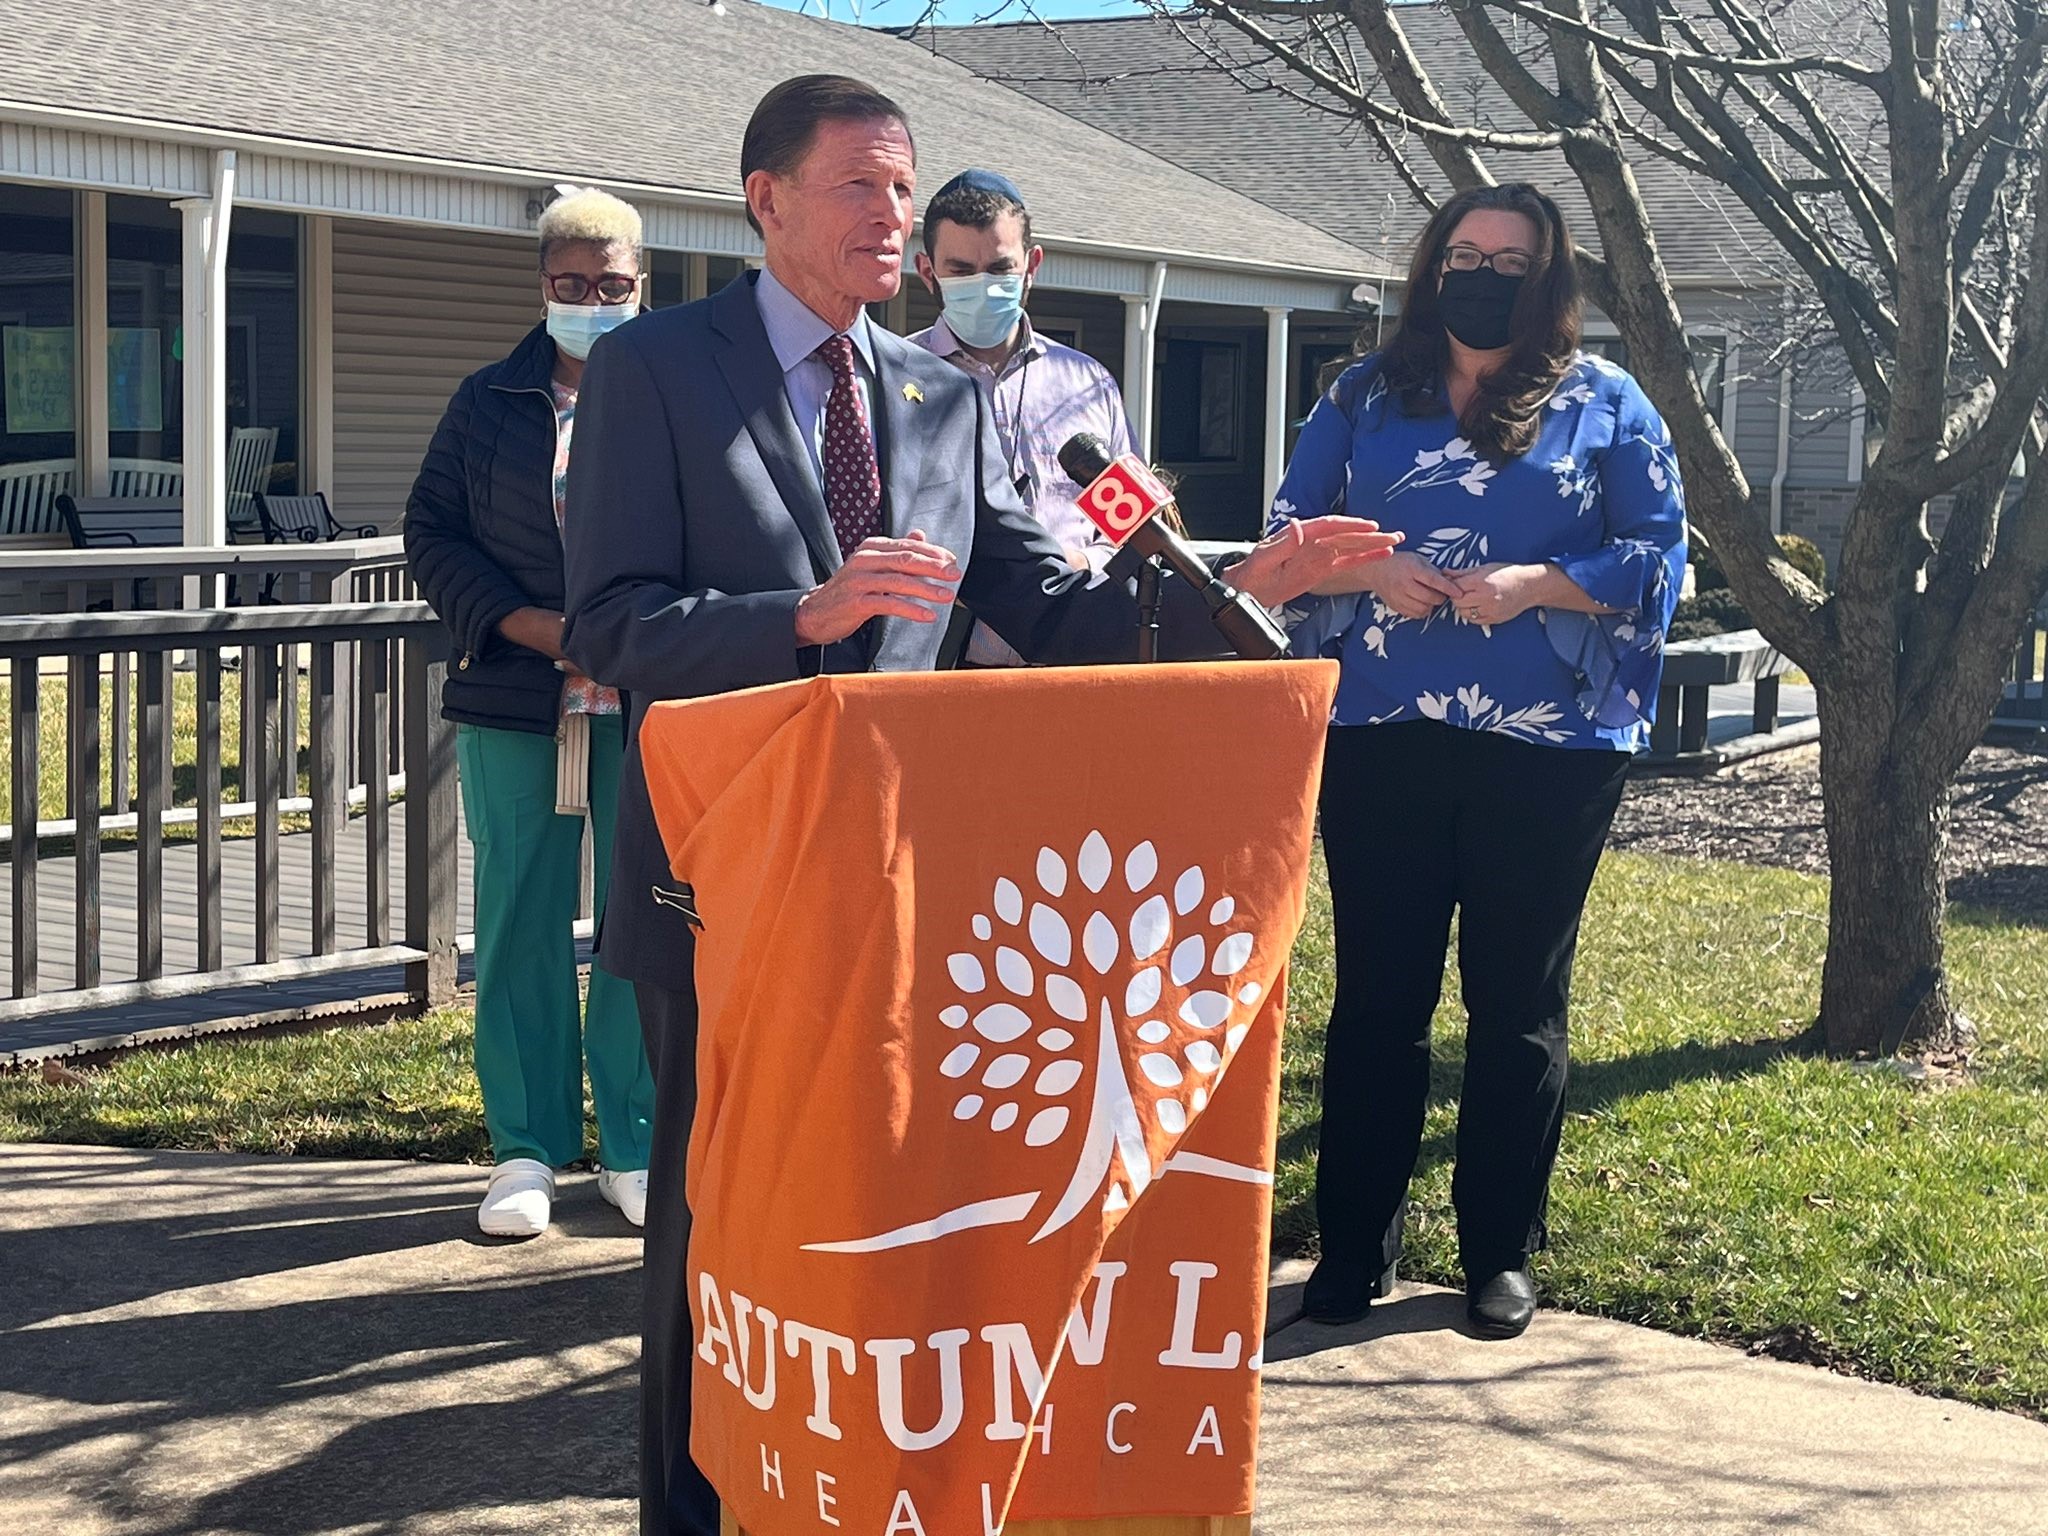 Blumenthal joined health care workers to urge the Center for Medicare and Medicaid Services to issue staffing standards for nursing homes.